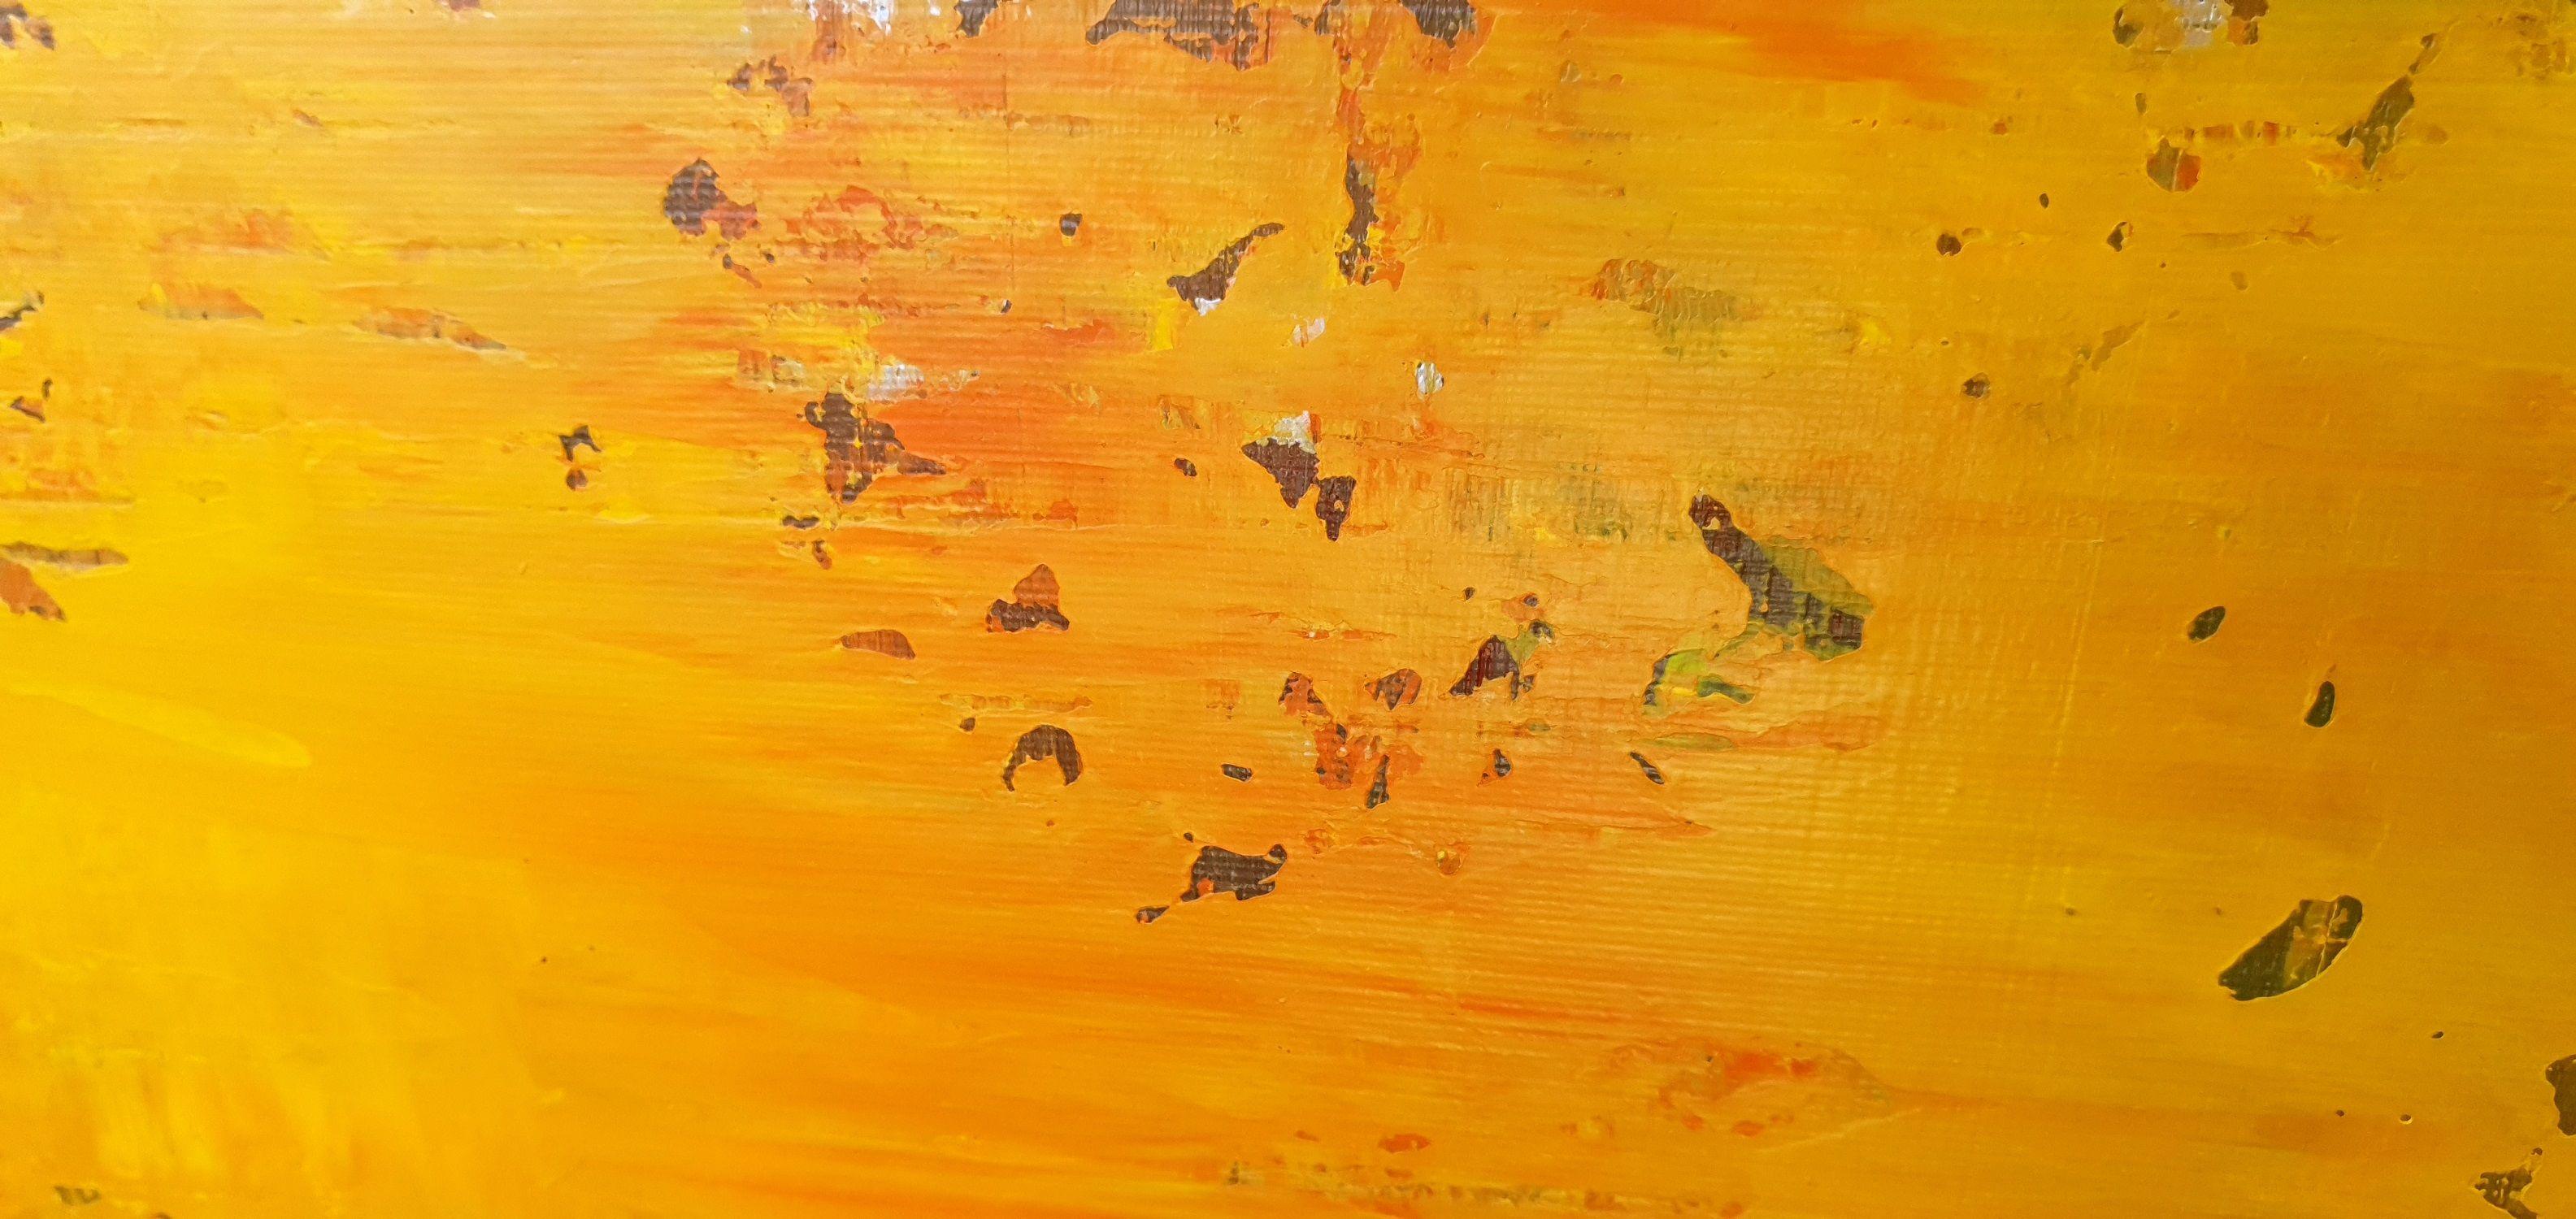 An original one-of-a-kind abstract painting.    Minimalistic yet powerful.  Inspired by autumn, the last ray of Sun, Indian summer, and the smell of fallen leaves.    Shades of orange and yellow with a touch of silver color will certainly brighten